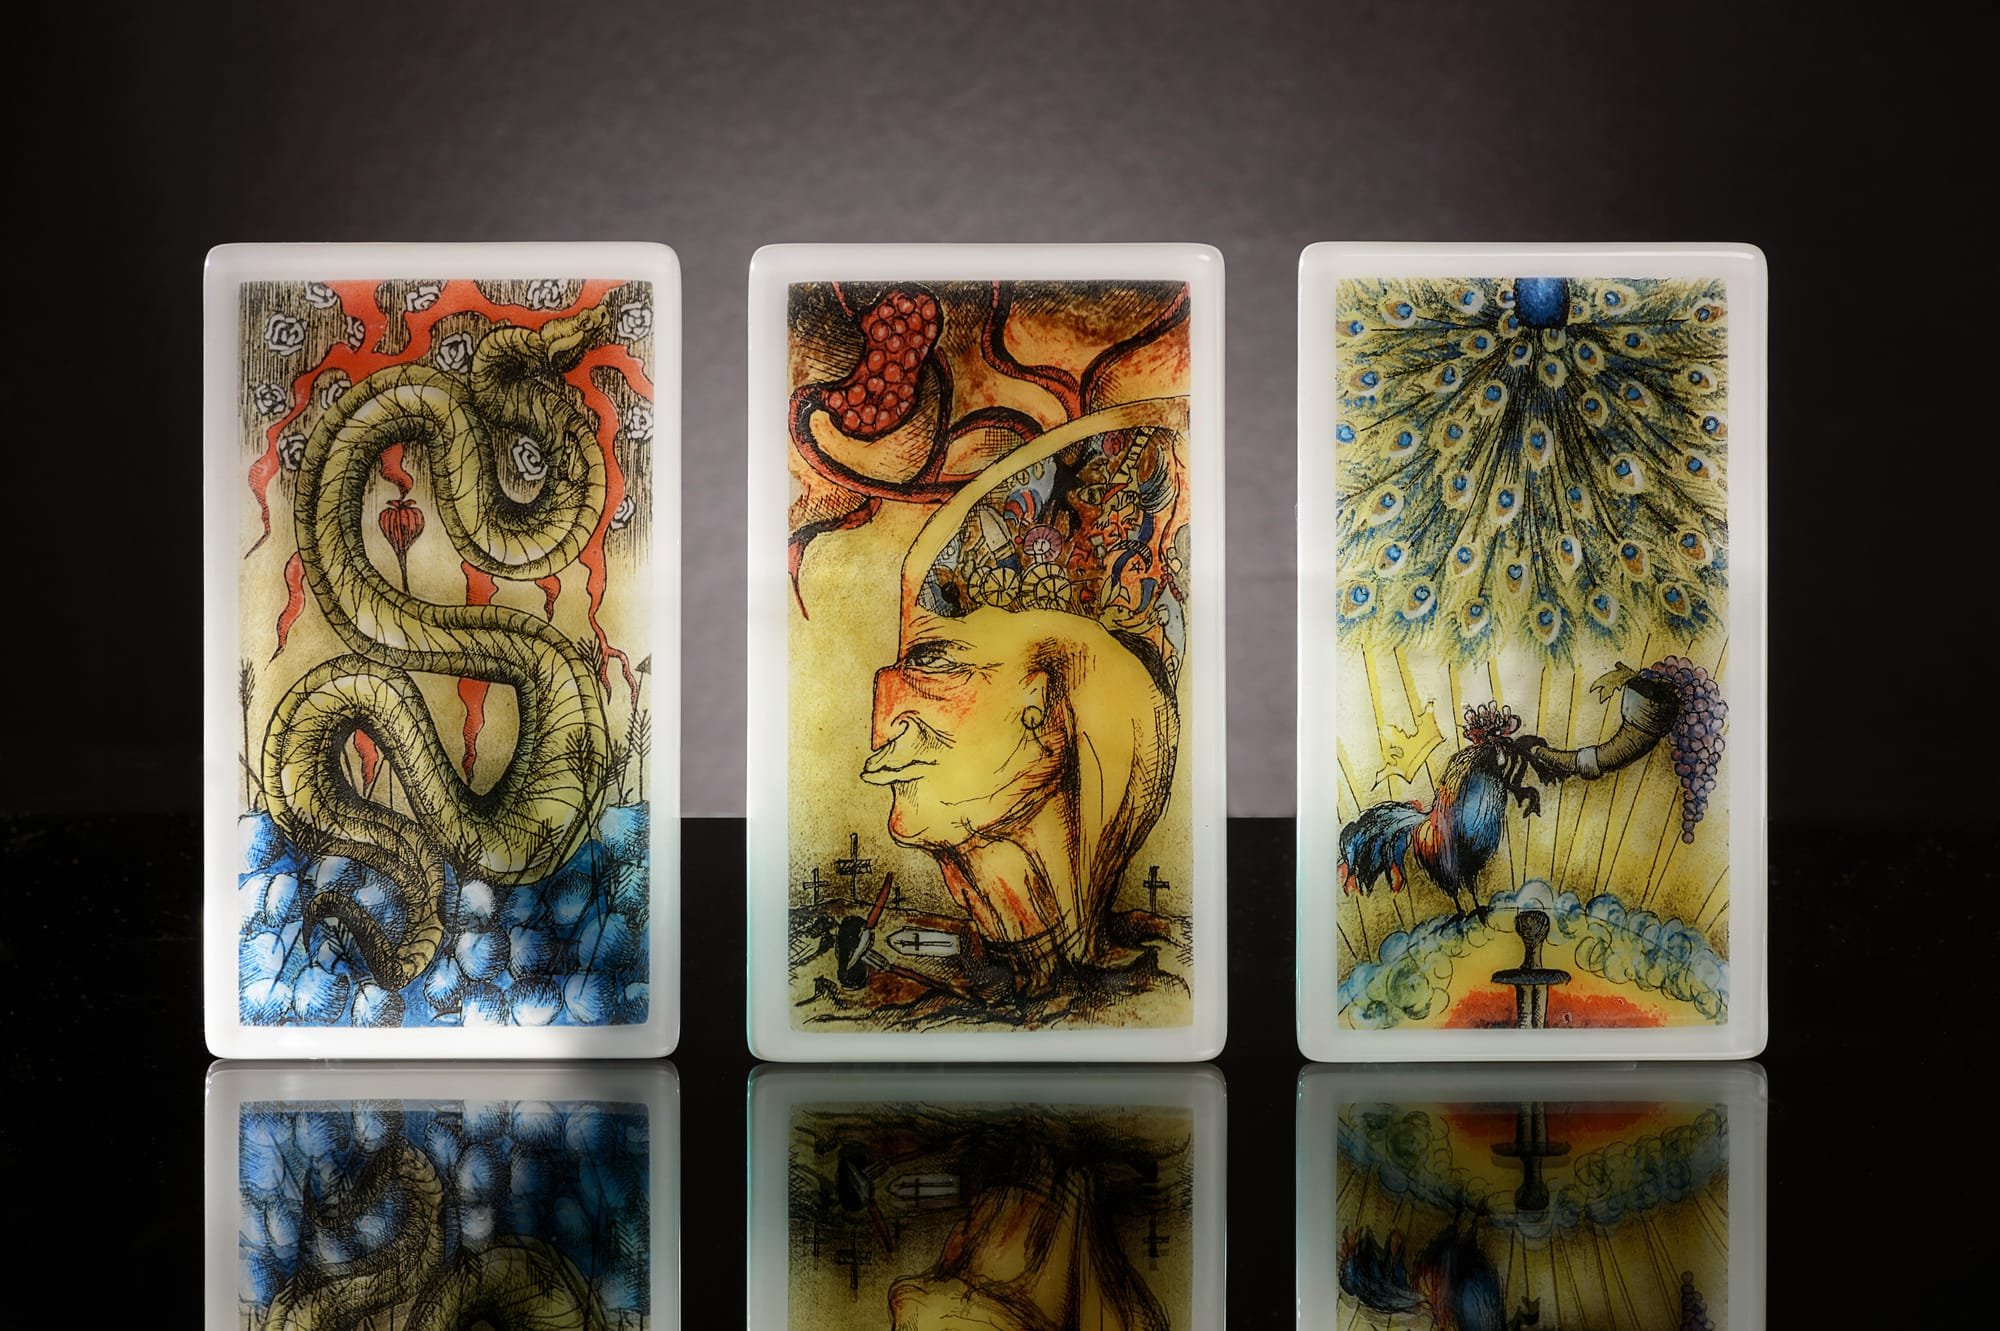 Seven Cards of The Seven Deadly Sins